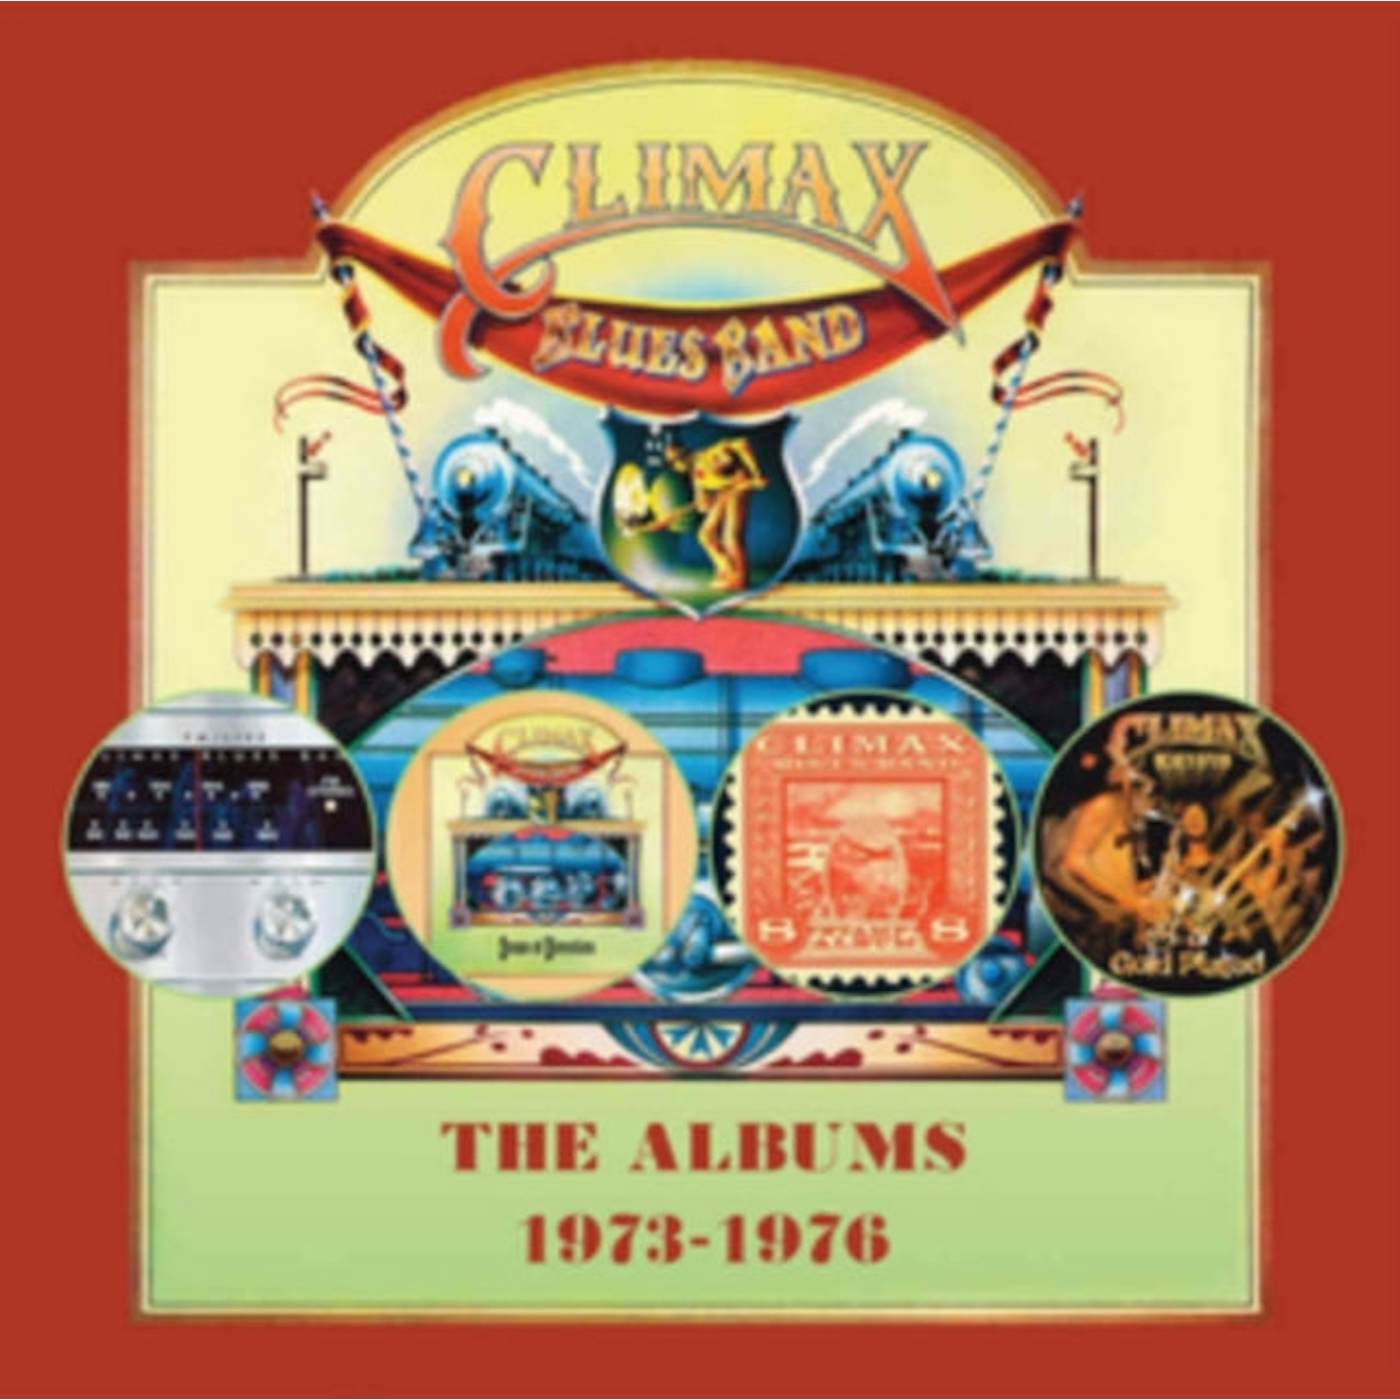 Climax Blues Band CD - The Albums 19 73-19 76 (Remastered Edition)